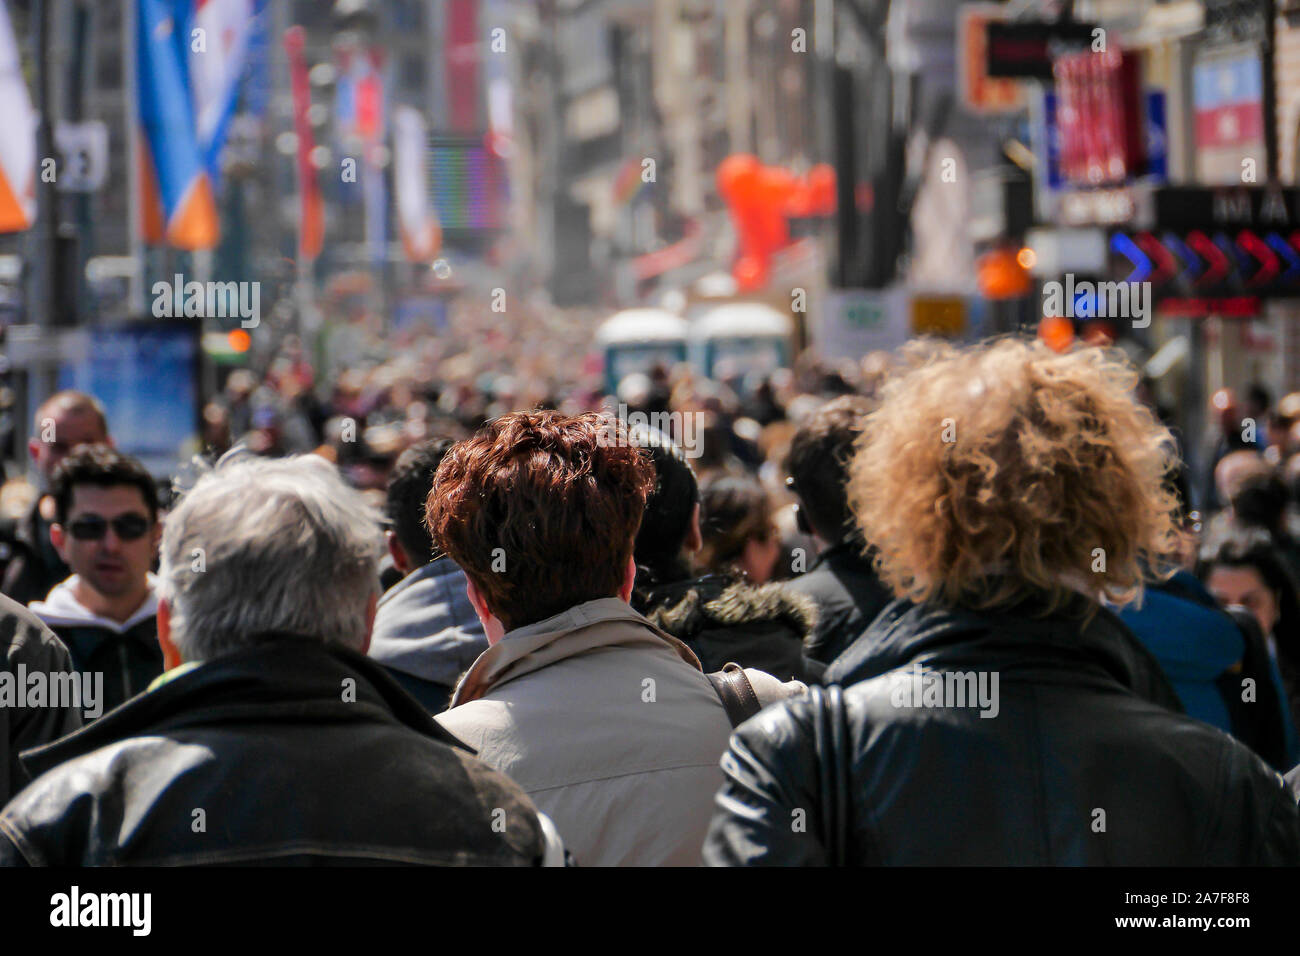 Amsterdam, Netherlands. Circa spring 2013. Large crowd on people walking on street in Amsterdam. Stock Photo